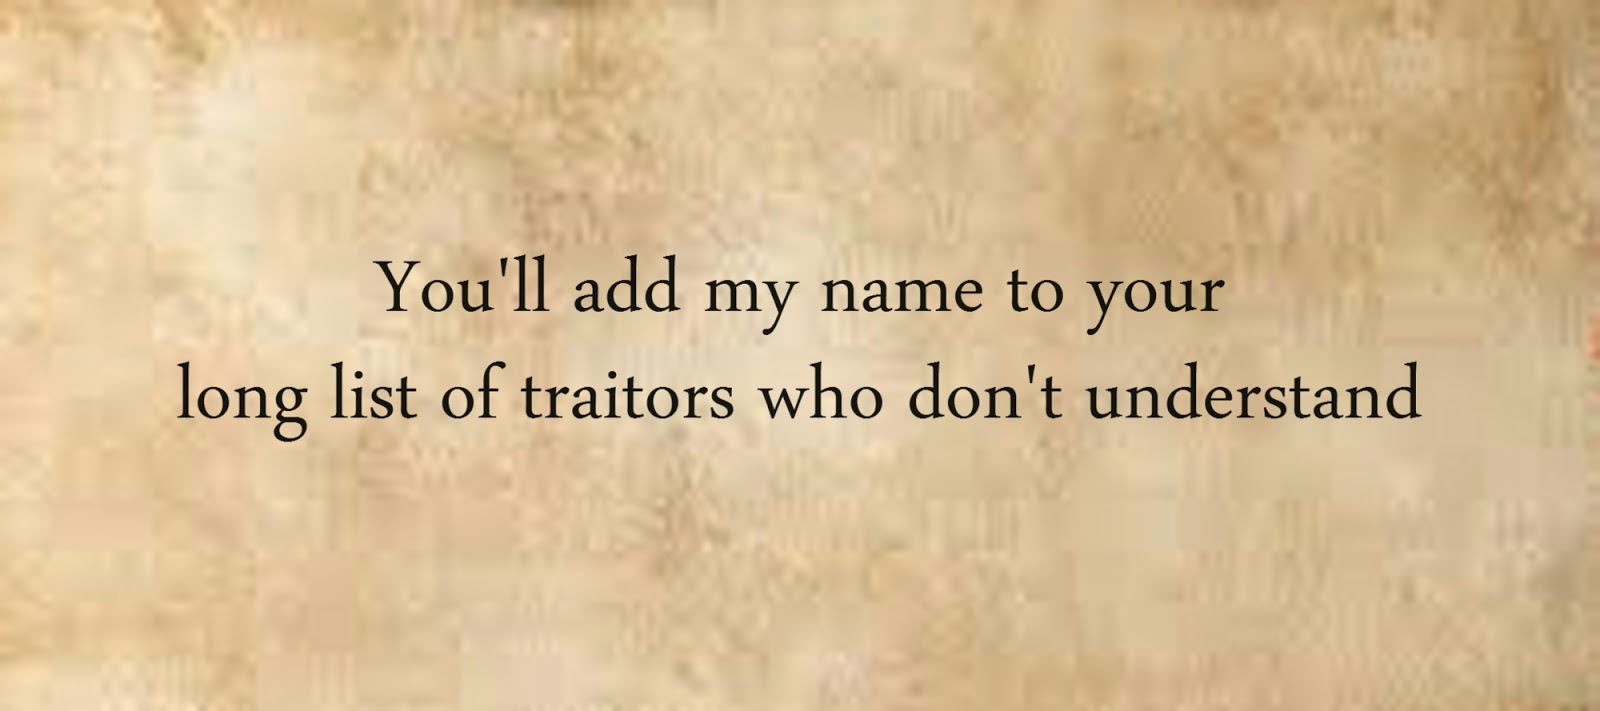 you'll add my name to your long list of traitors who don't understand